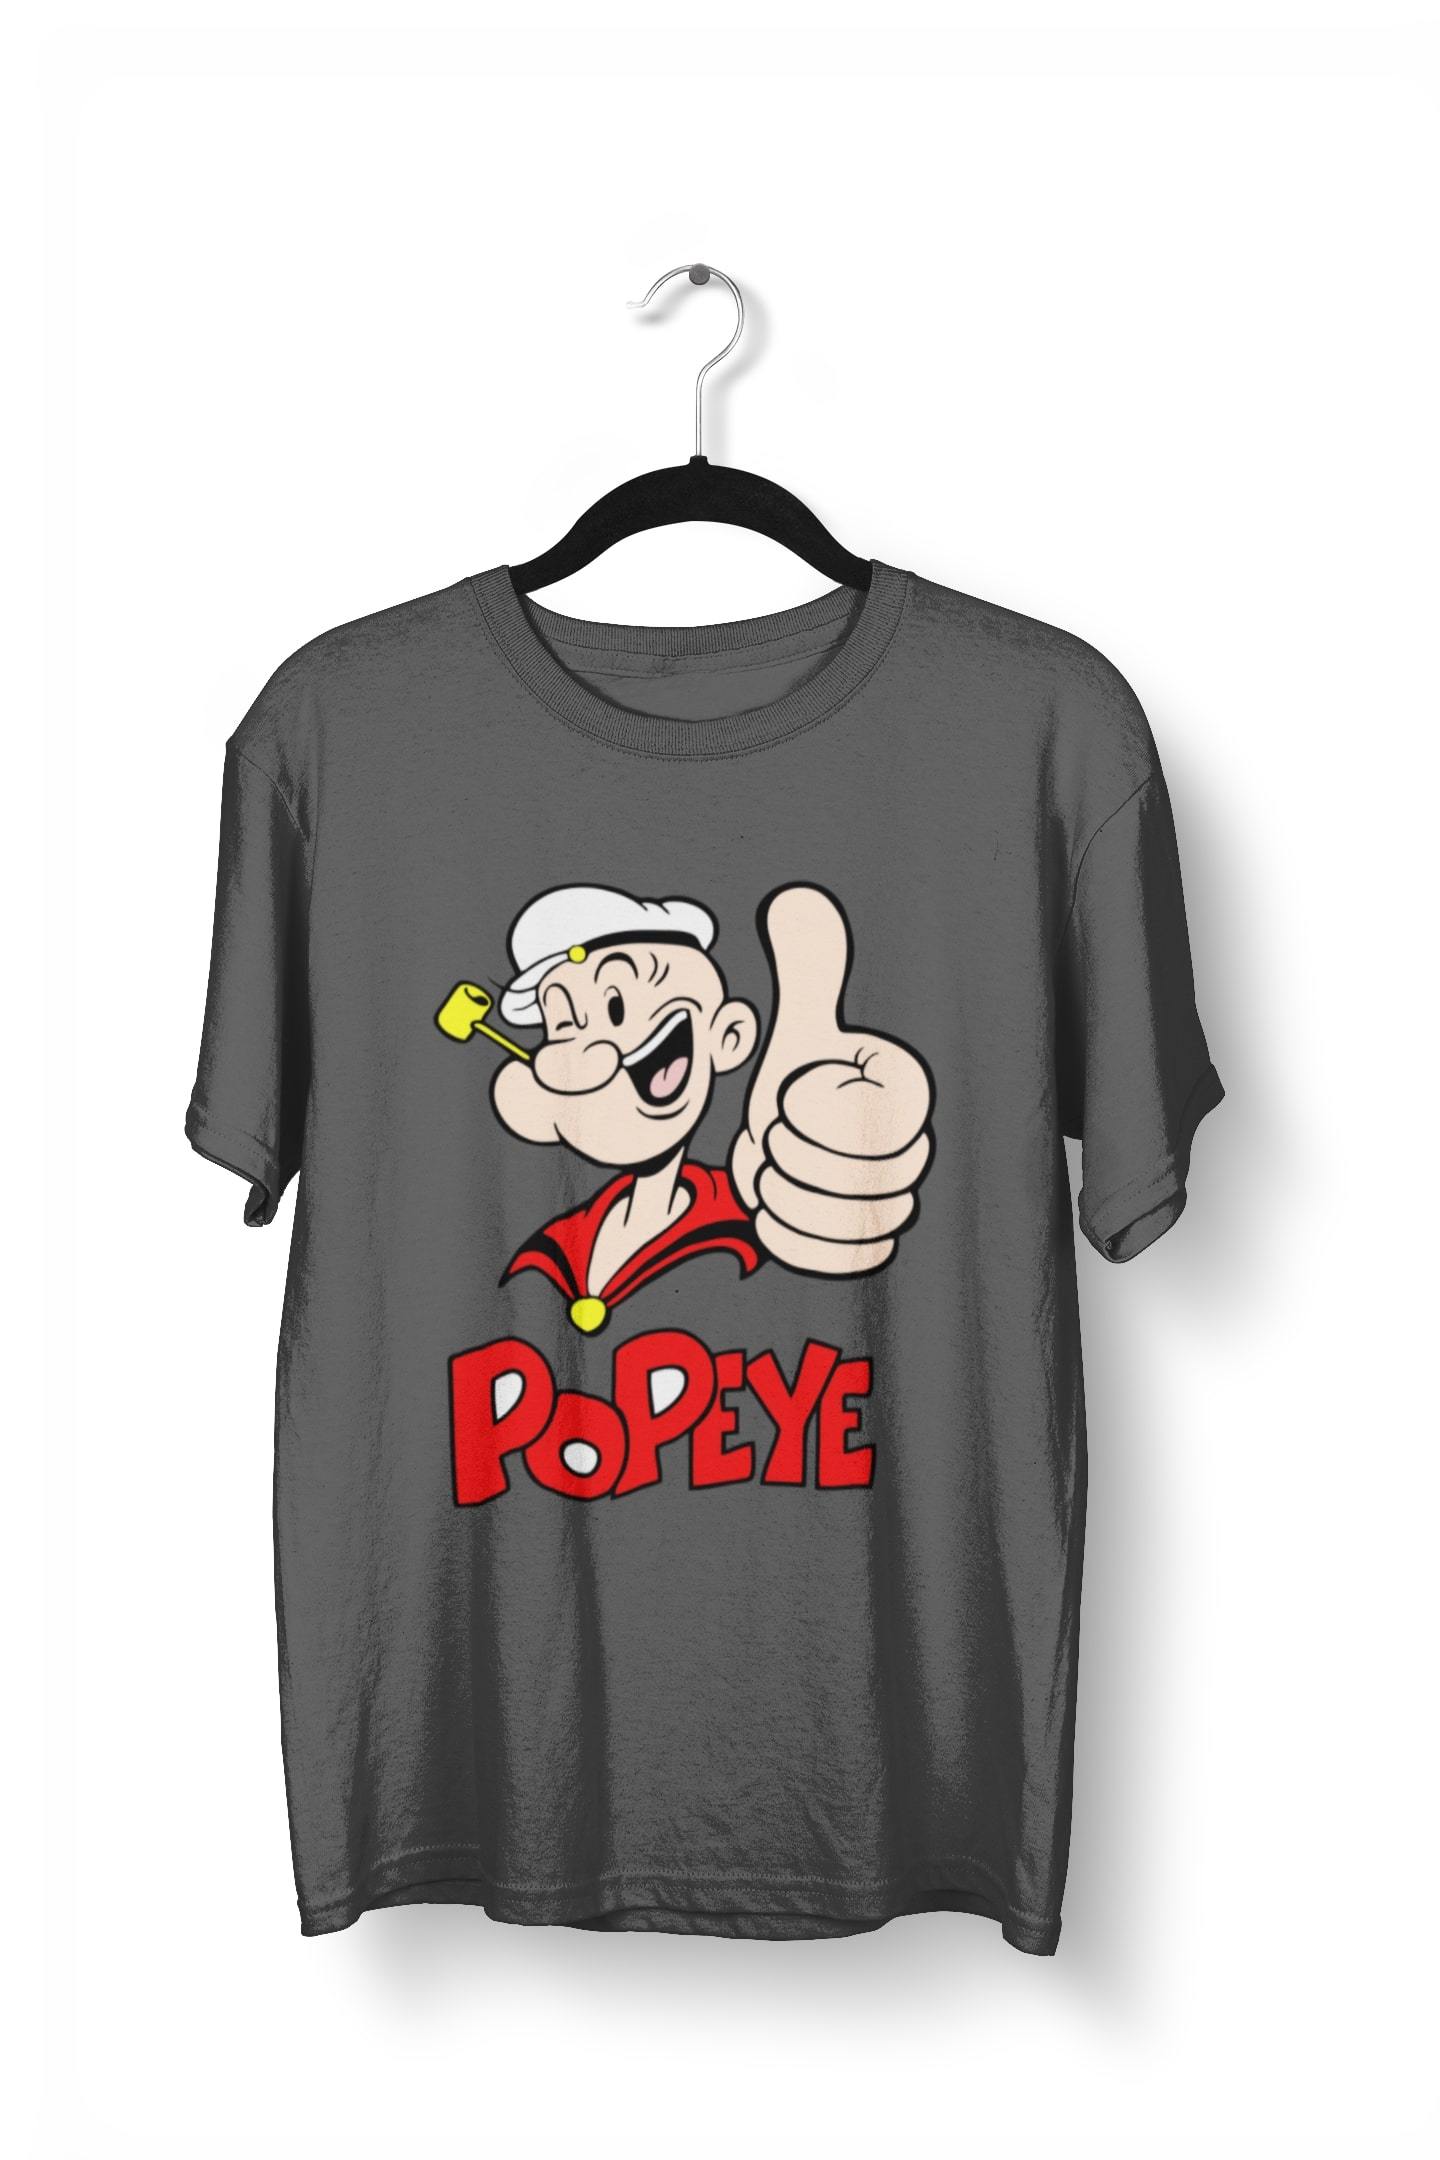 thelegalgang,Popeye Thumbs Up T-Shirt for Men,.